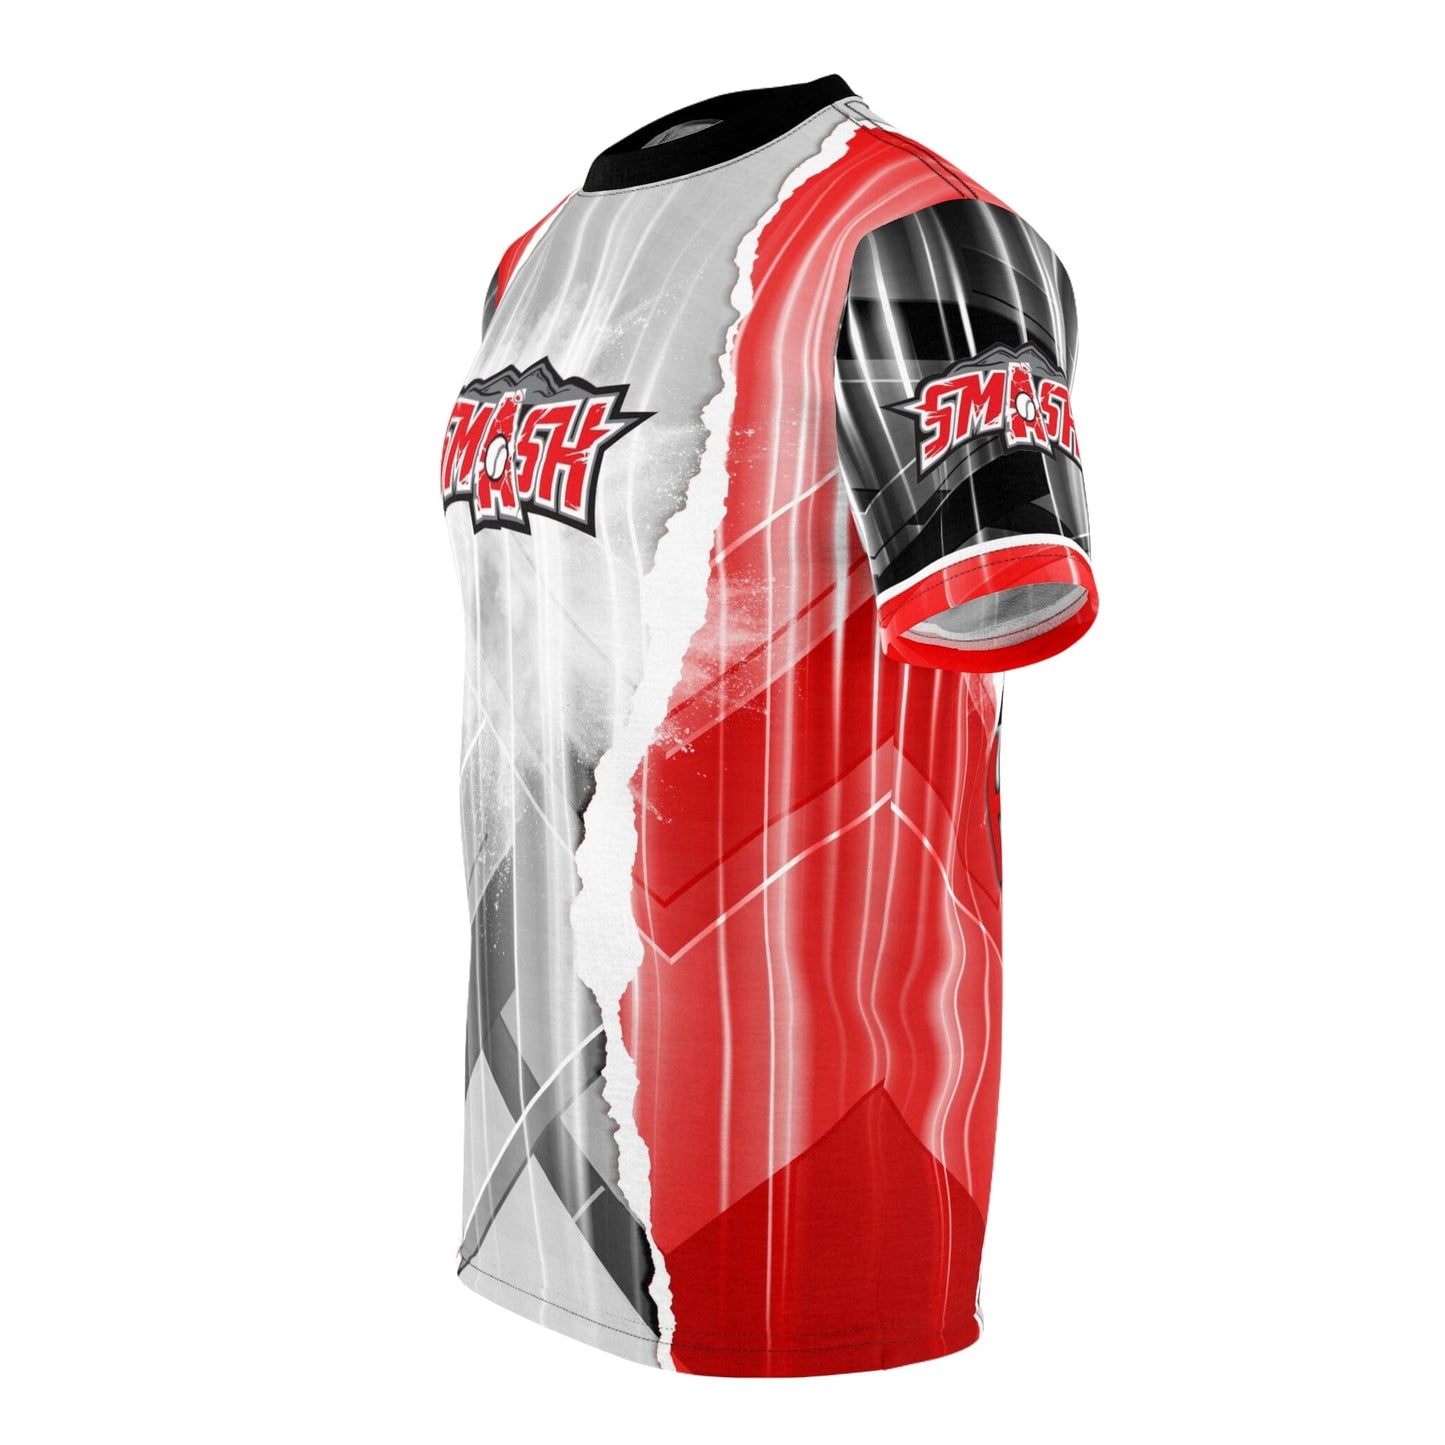 RIPPED - Men's Full Sublimated Sportswear Shirt-Photoshop Template - PSMGraphix